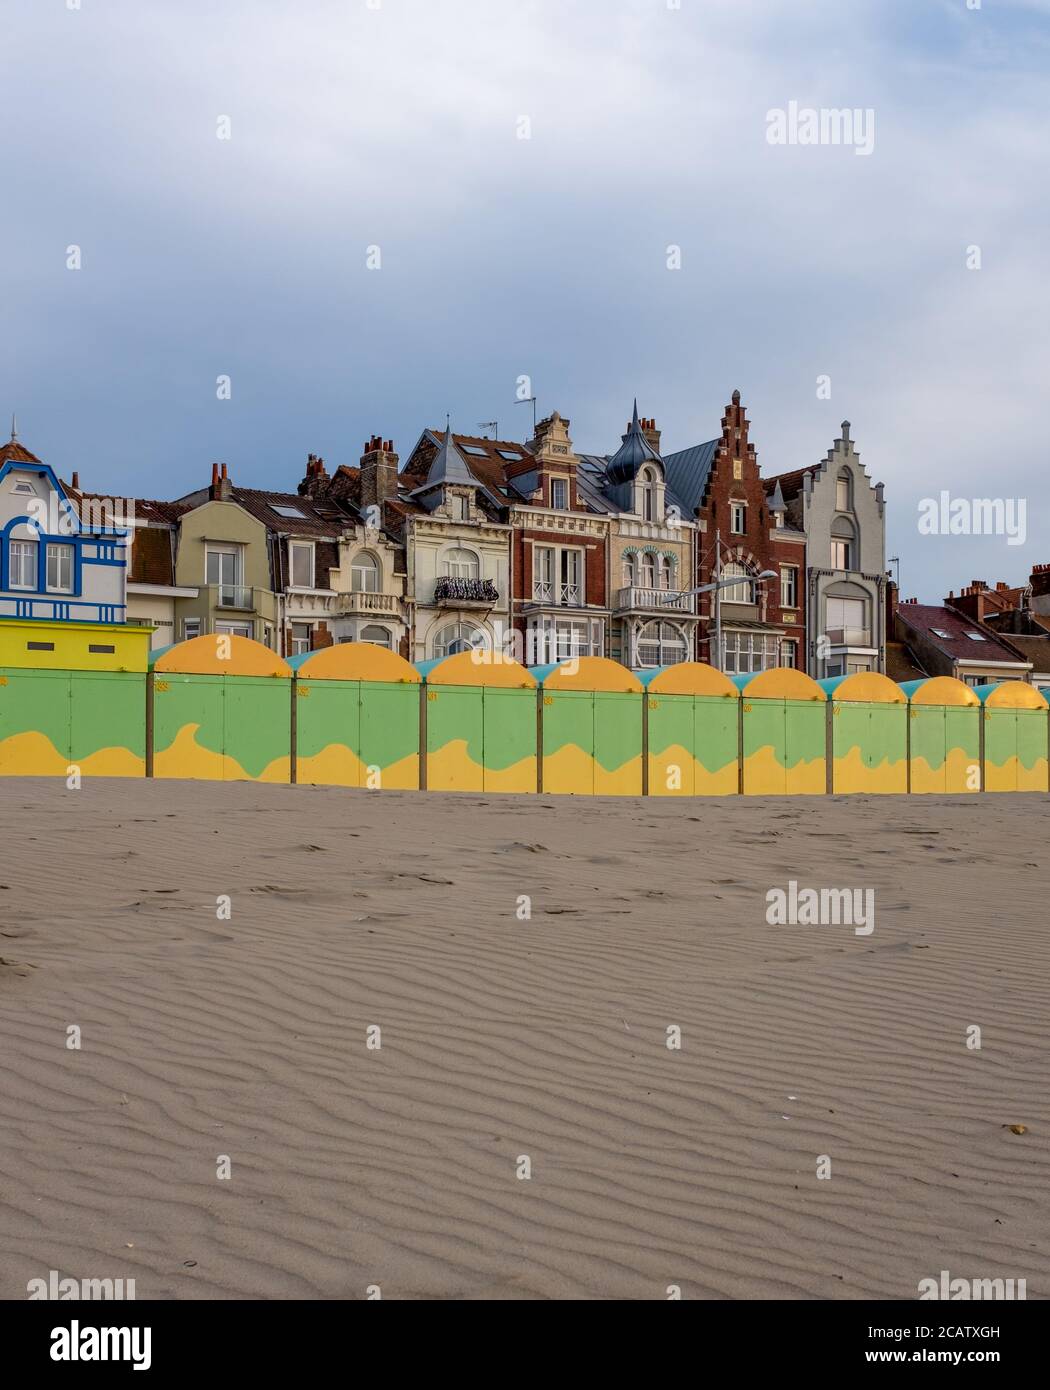 Colorful beach huts in front of historic seaside buildings in Dunkirk, France/ Stock Photo